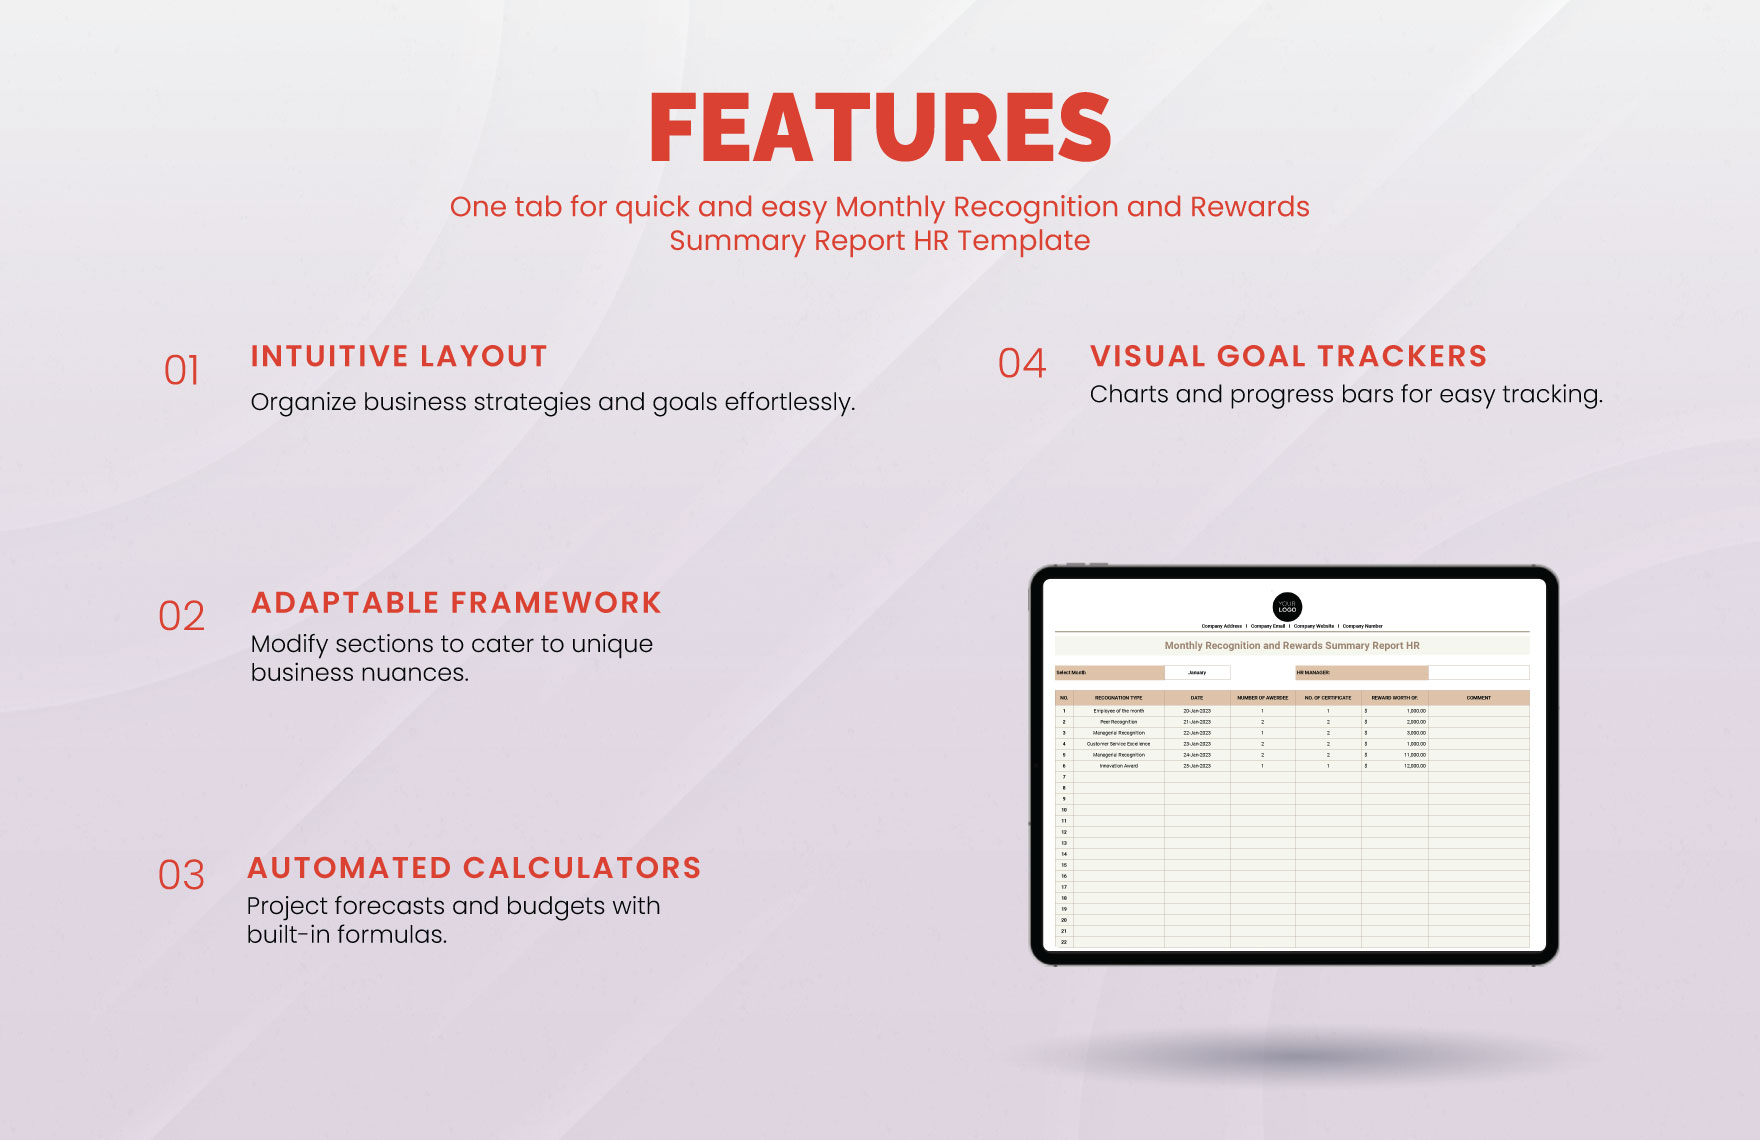 Monthly Recognition and Rewards Summary Report HR Template